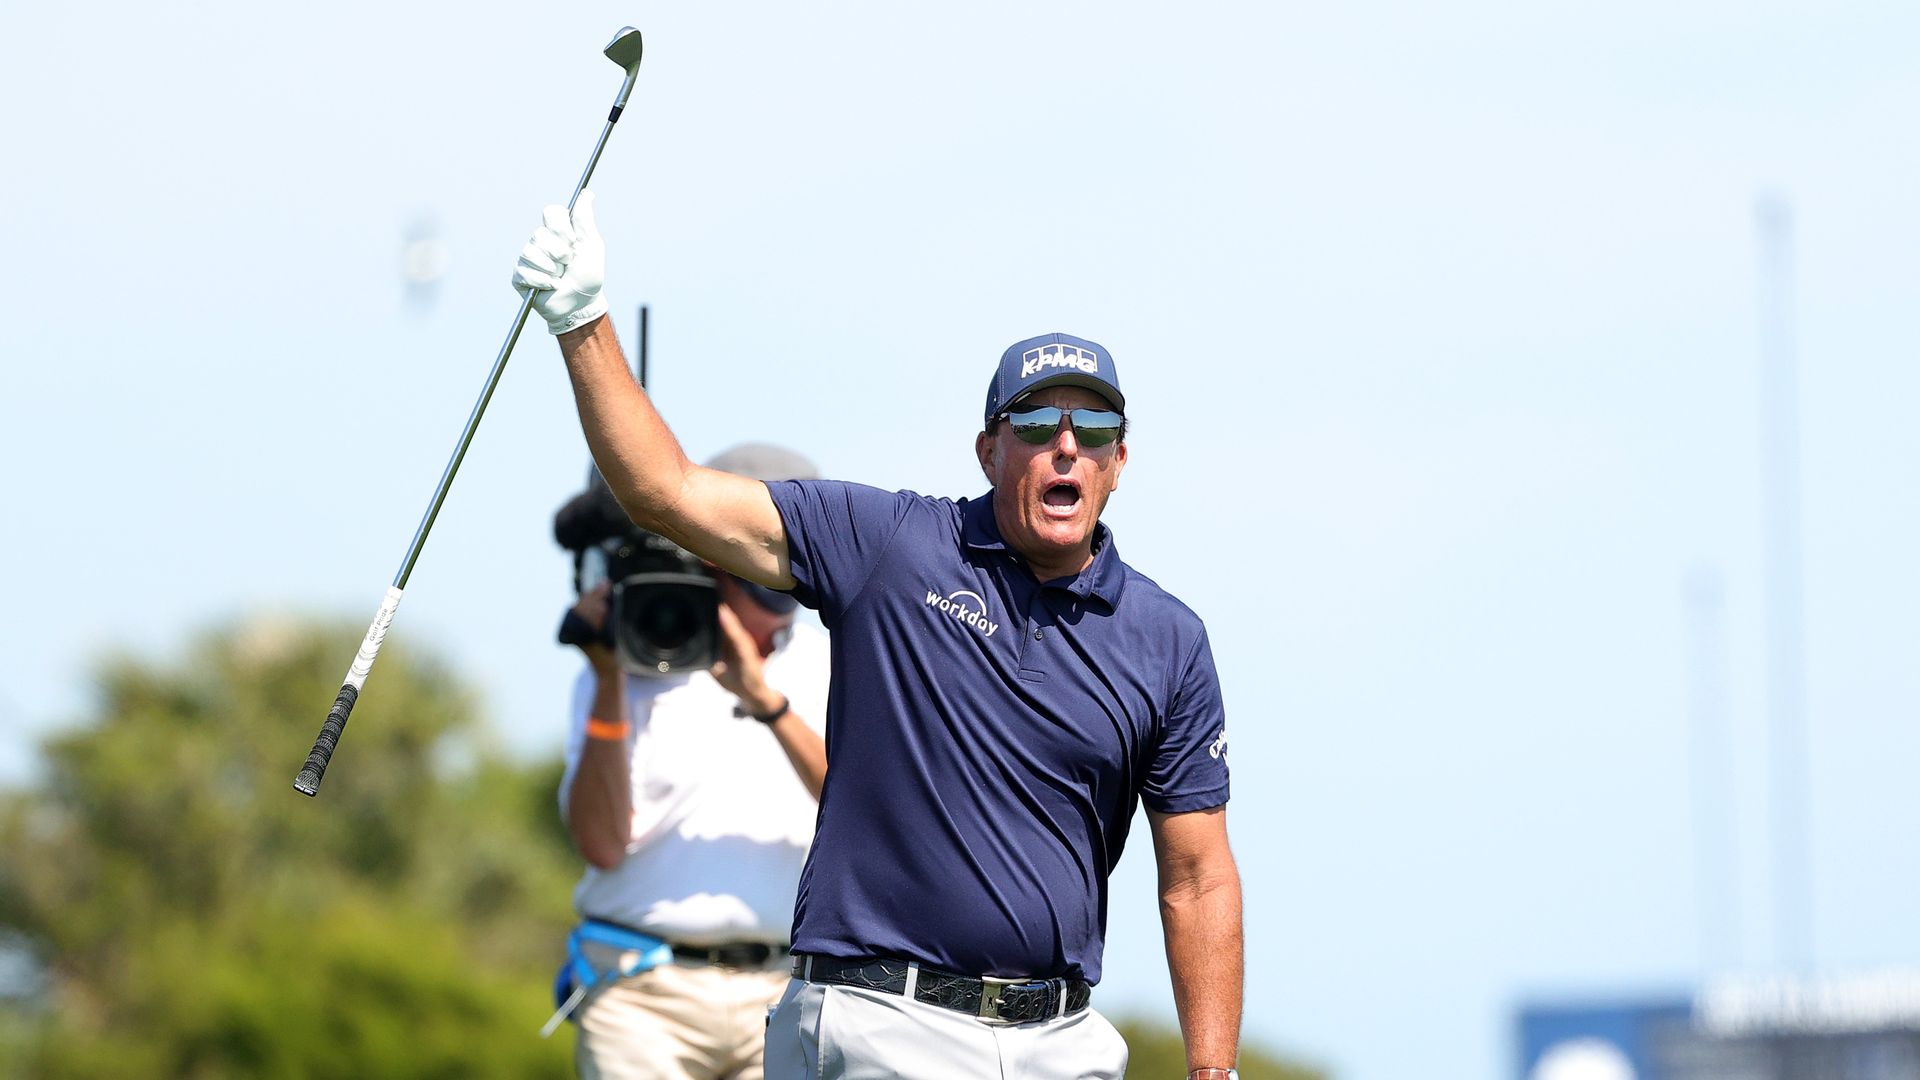 Phil Mickelson reacts to a shot at the 2021 PGA Championship held at the Ocean Course of Kiawah Island Golf Resort on May 23, 2021 in Kiawah Island, South Carolina. 